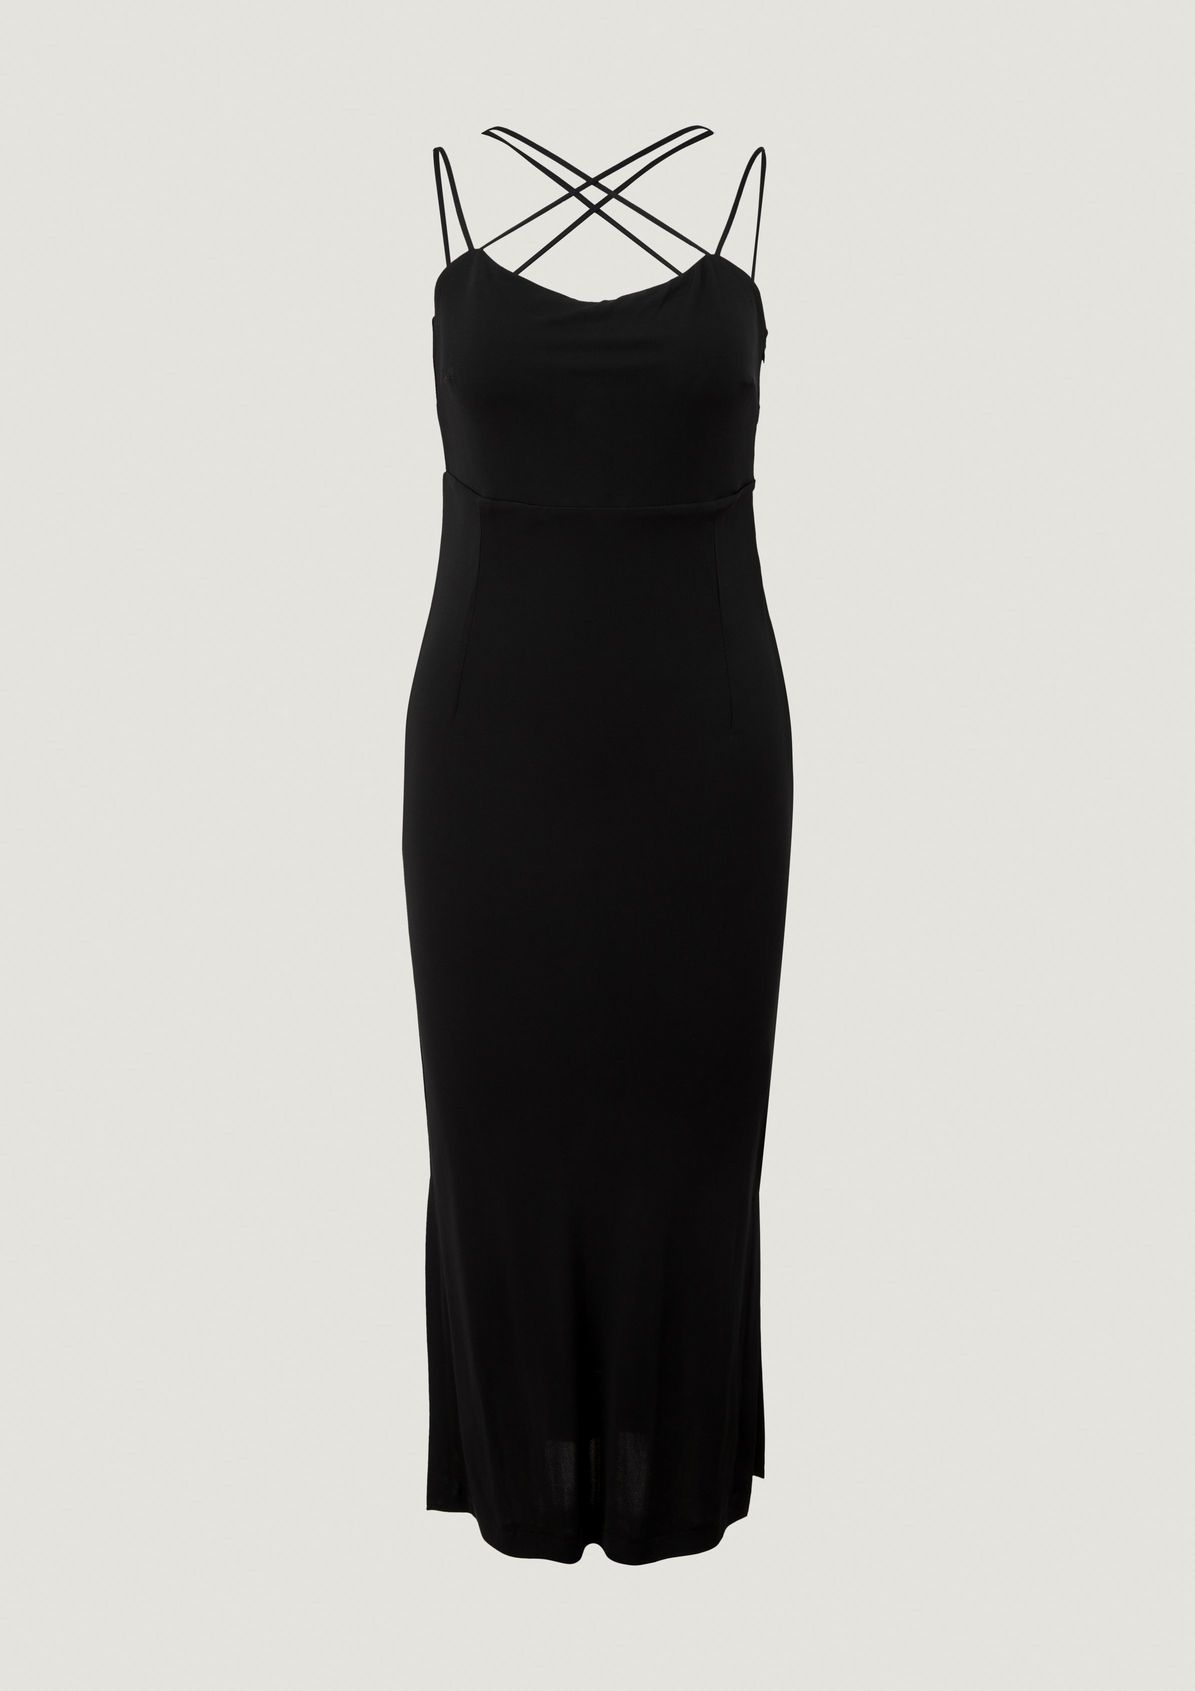 Jersey dress with spaghetti straps from comma